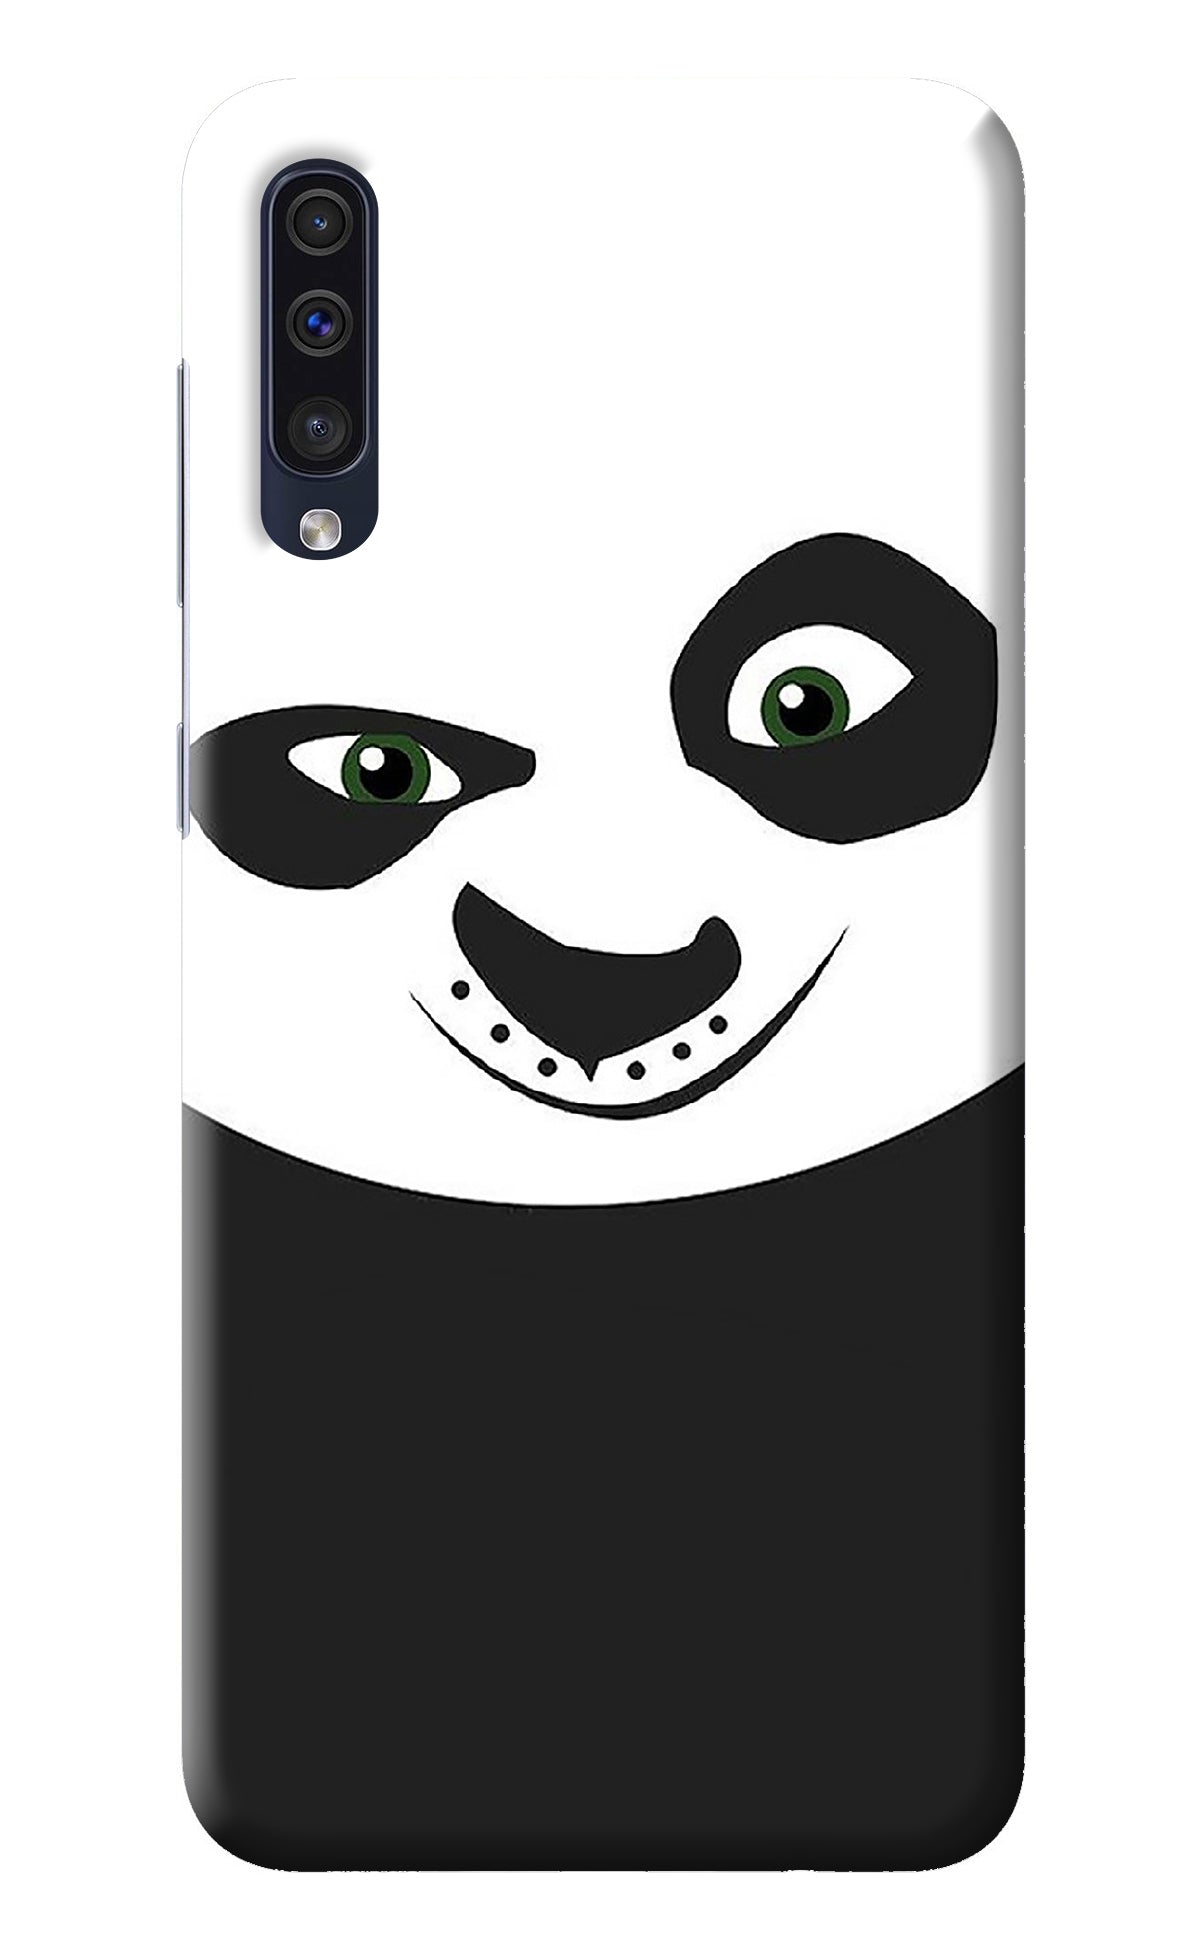 Panda Samsung A50/A50s/A30s Back Cover